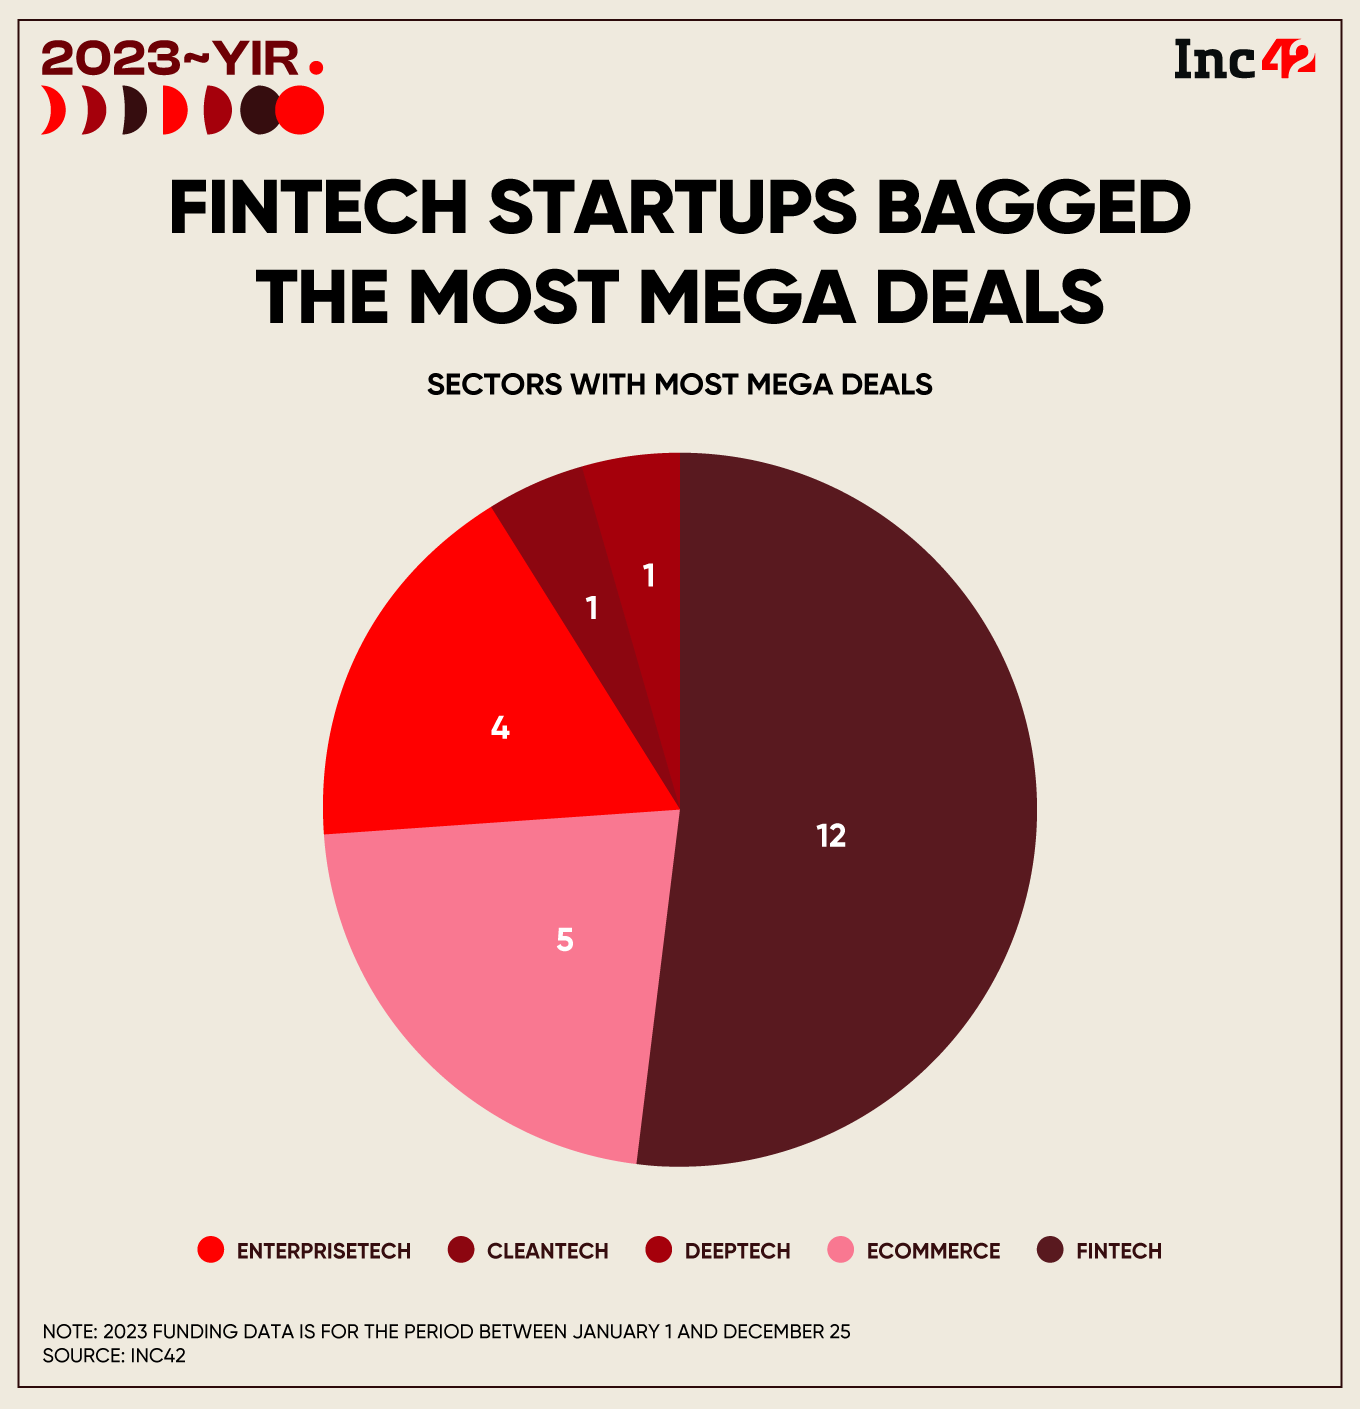 The fintech sector continued to be the darling of the investors as it accounted for more than half, 12 to be precise, of the total mega deals